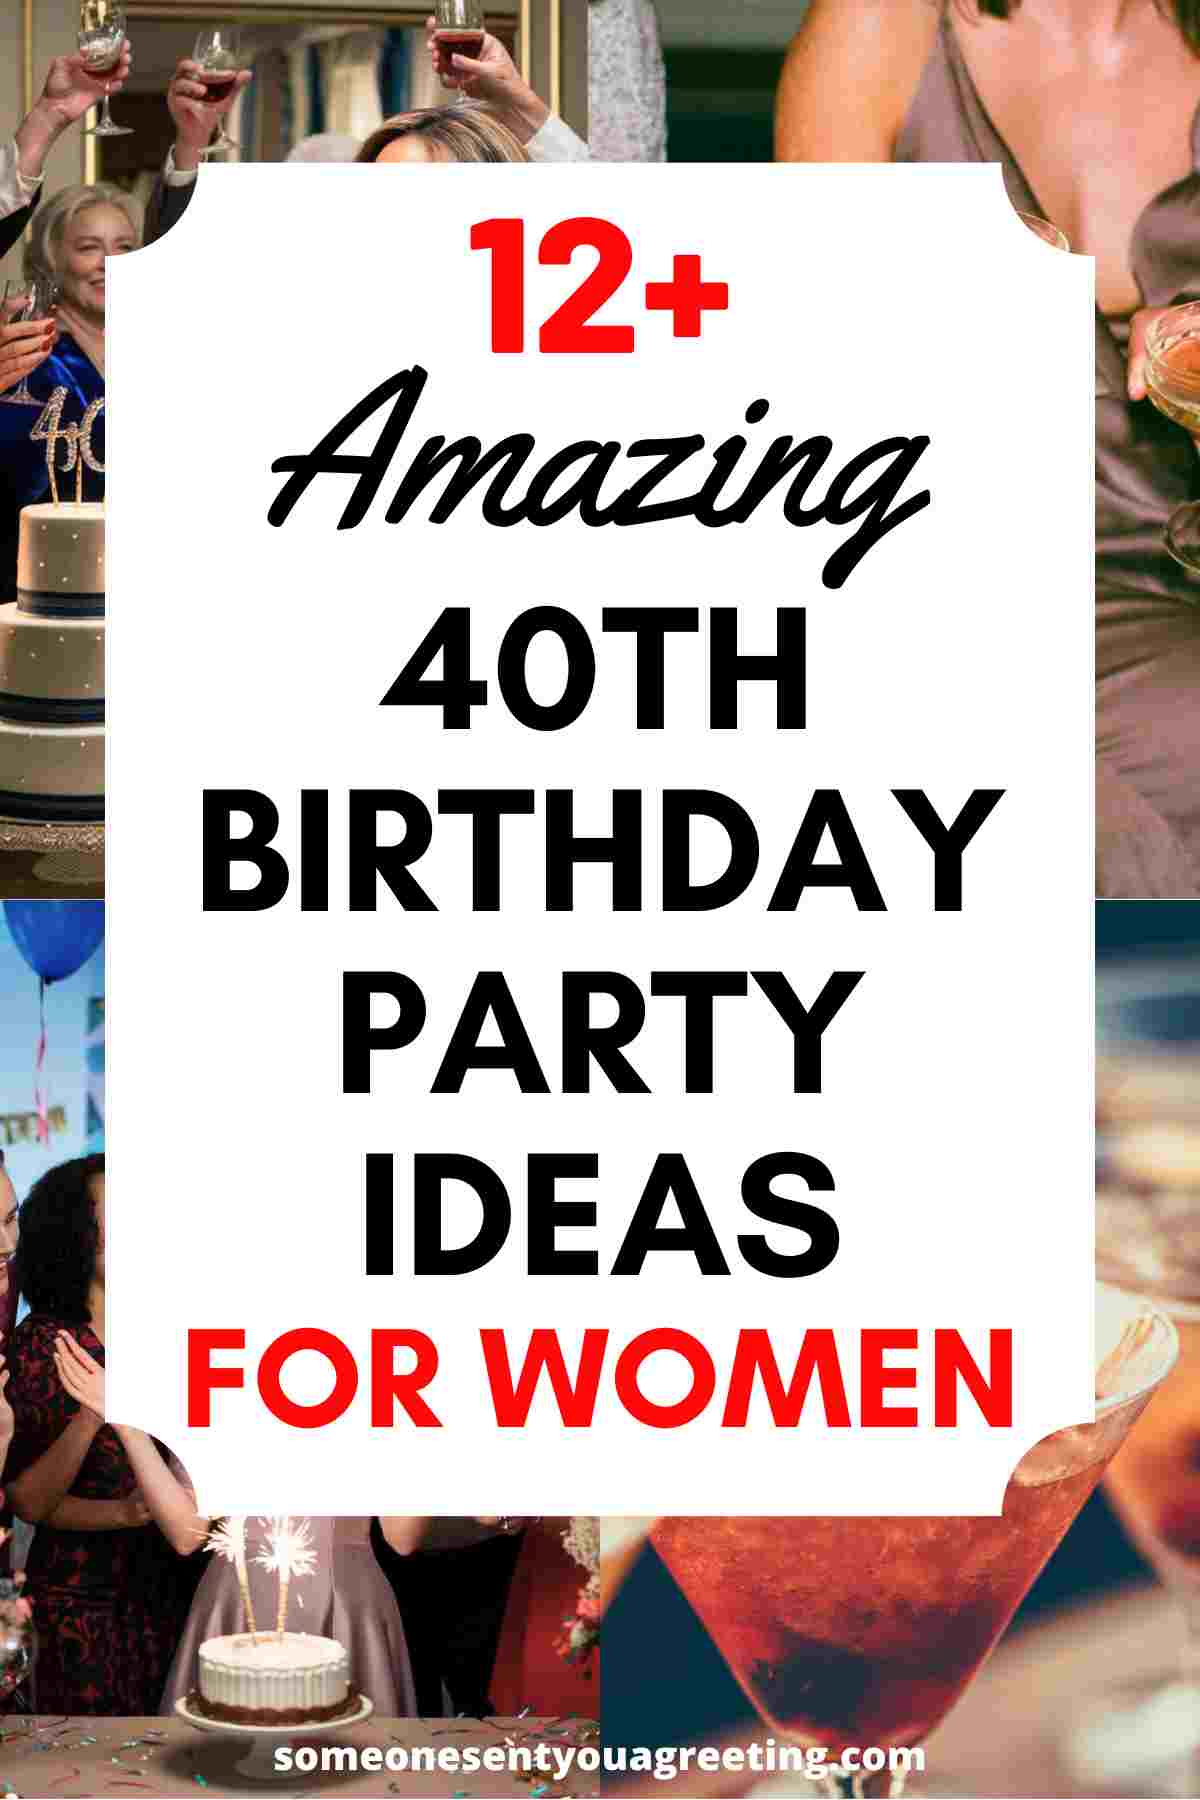 40th birthday party ideas for women